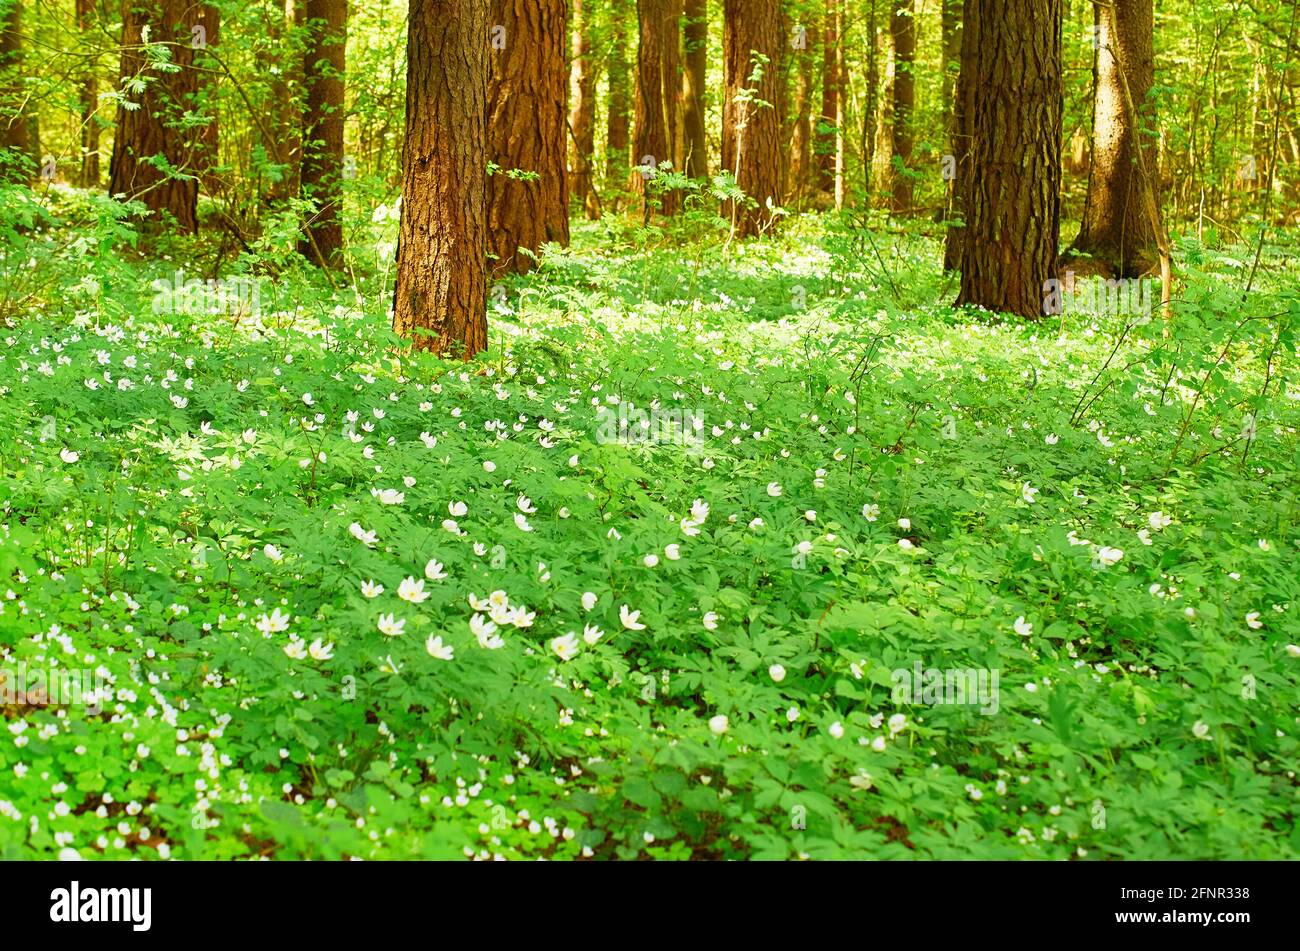 A lush carpet of blooming anemone between coniferous trees Stock Photo